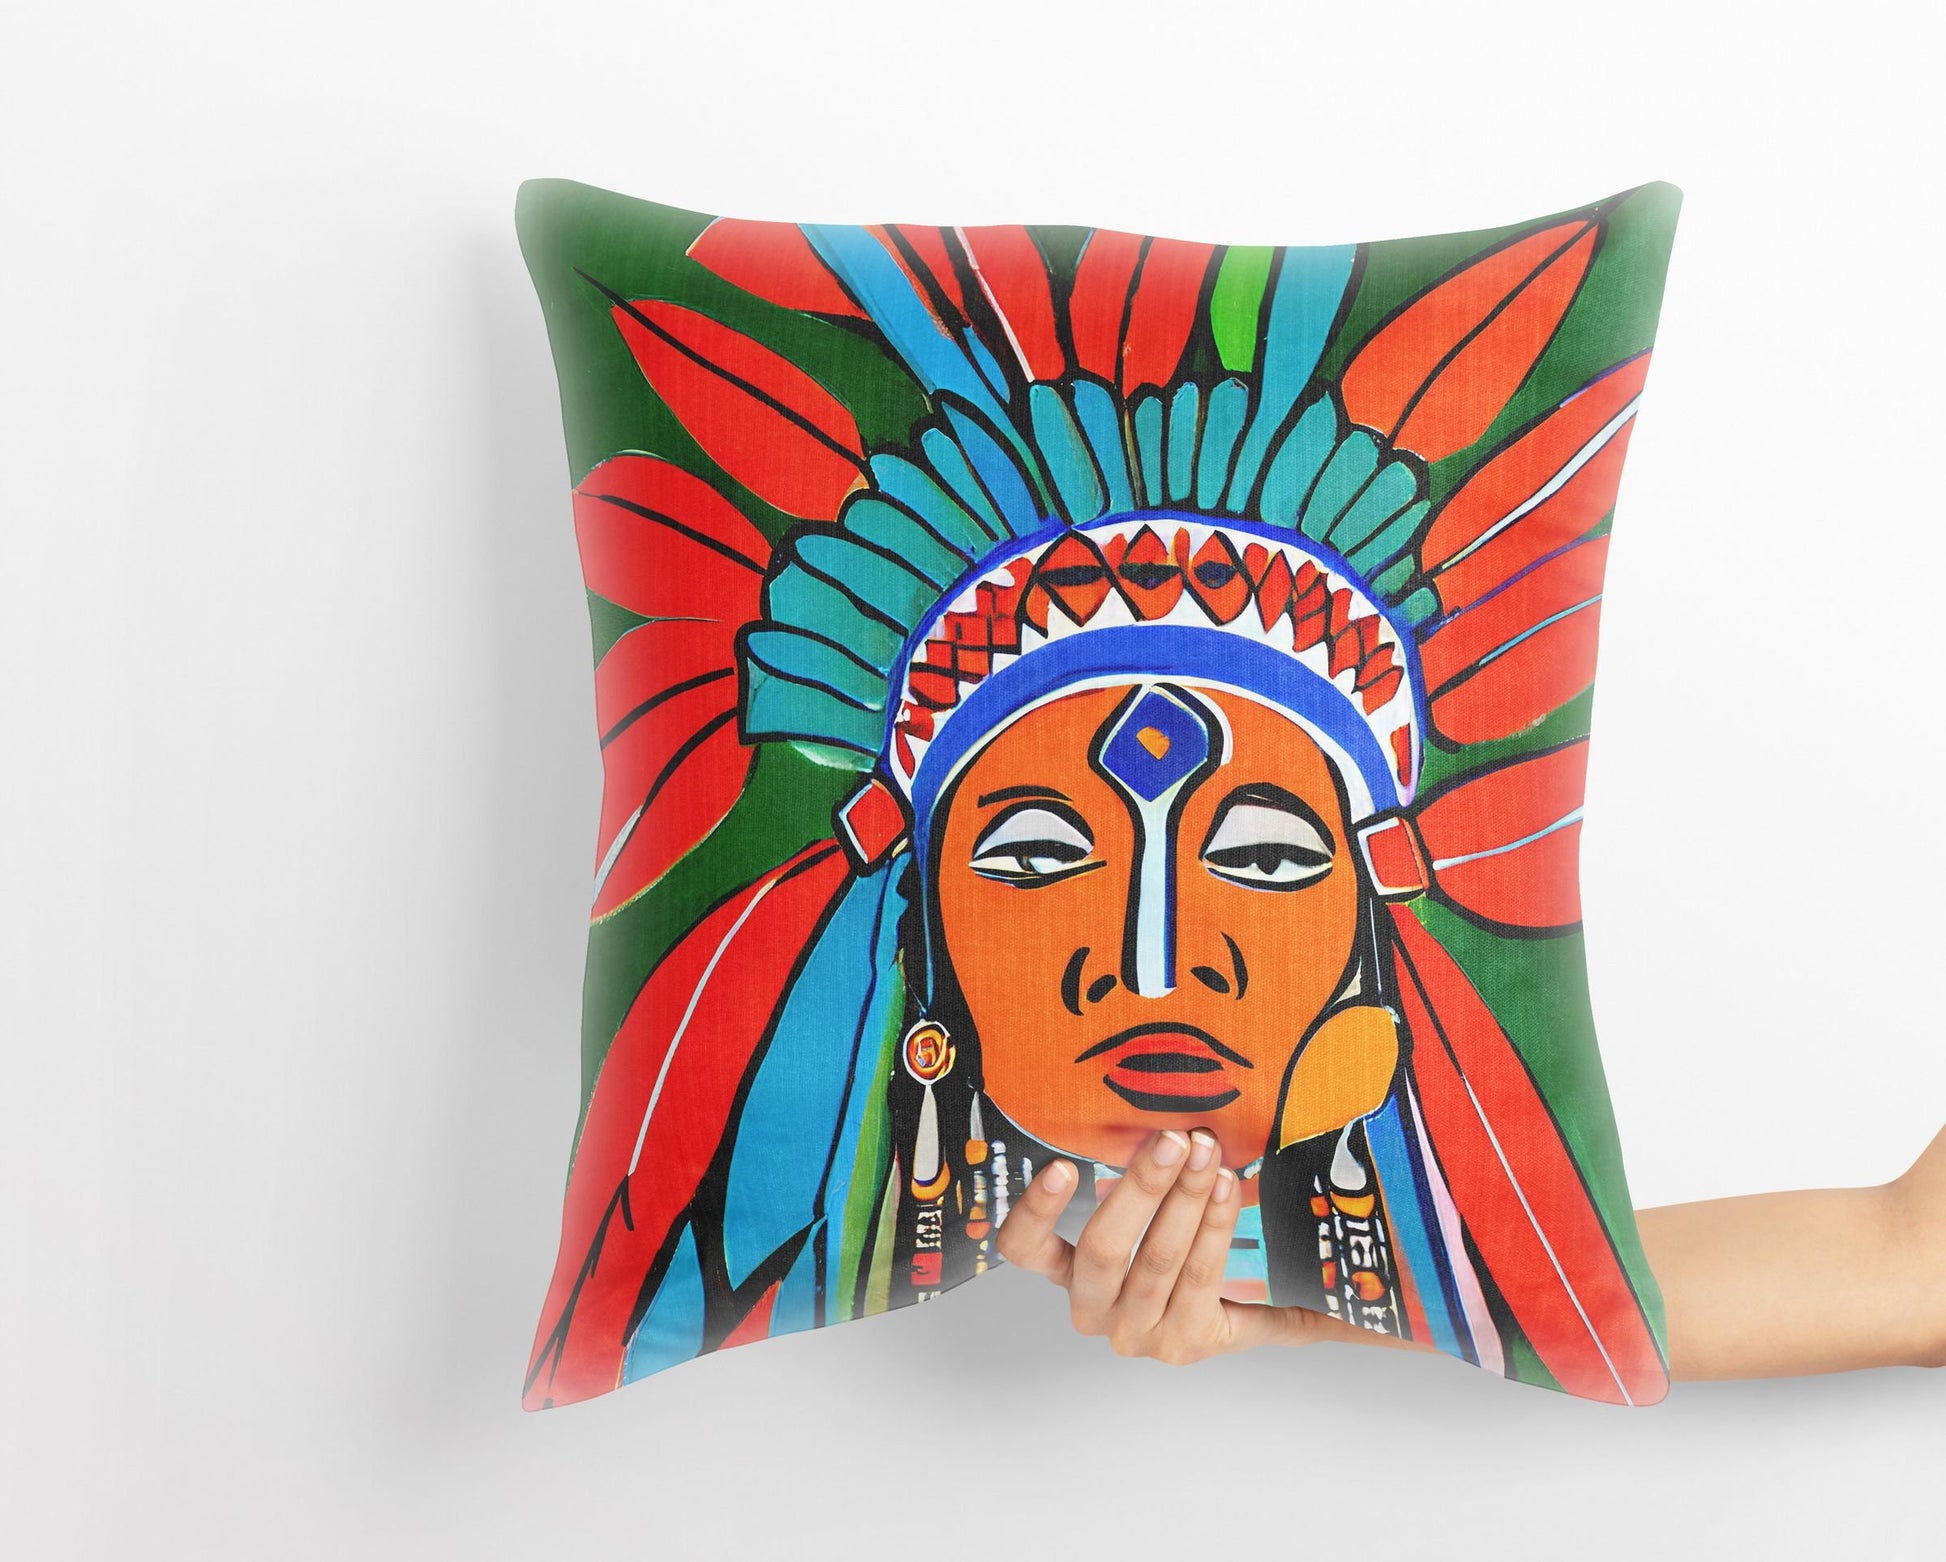 Indian Chief Pillow Case, Abstract Pillow Case, Artist Pillow, Colorful Pillow Case, Fashion, 20X20 Pillow, Home And Living, Abstract Decor